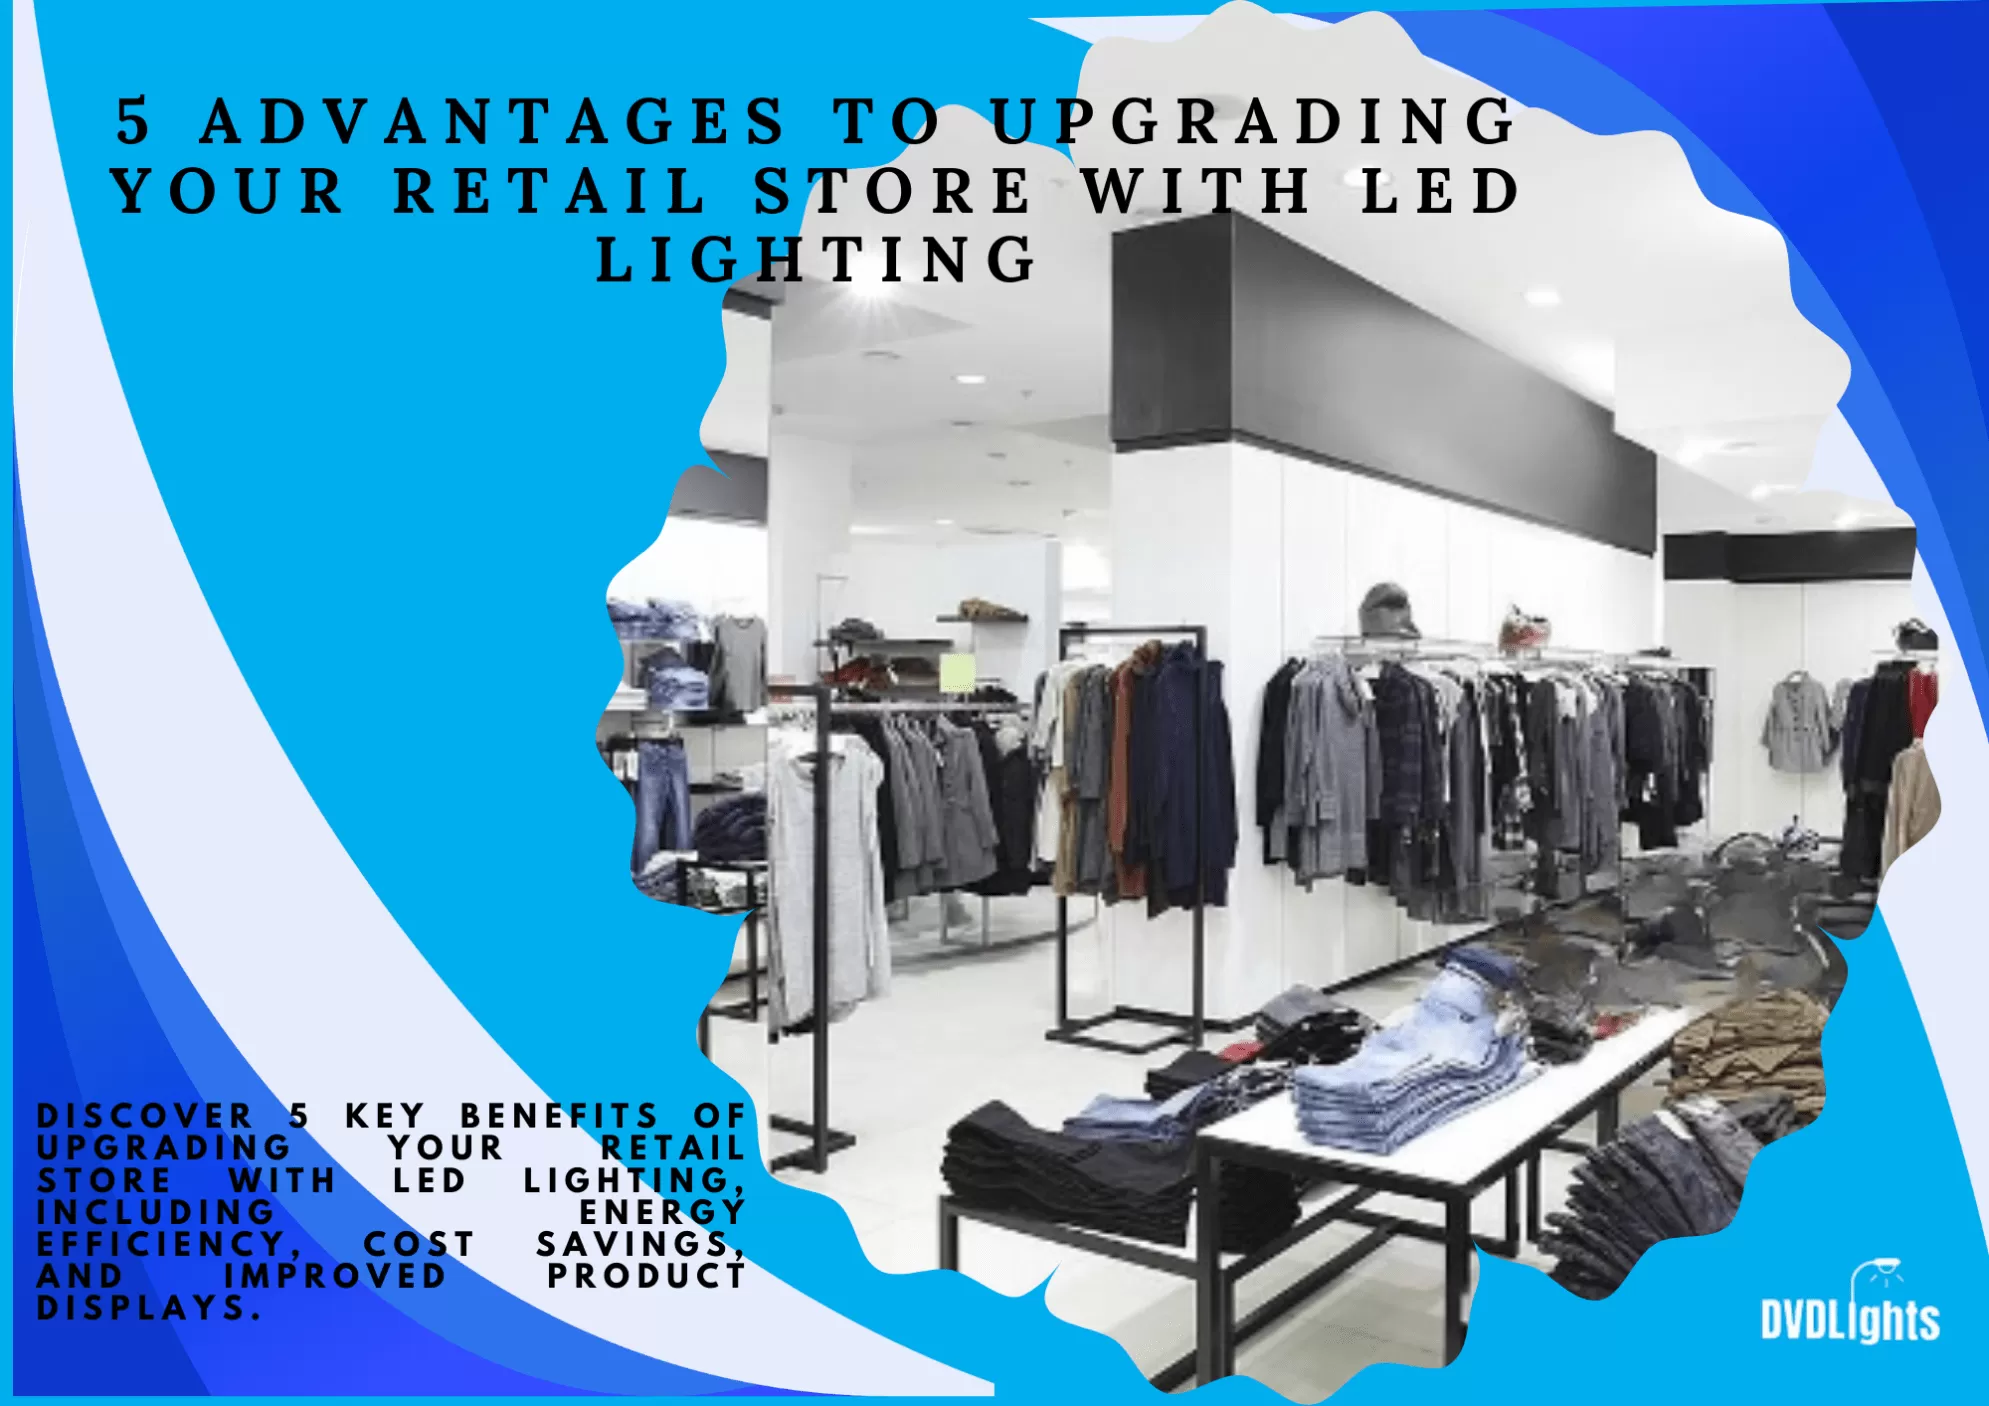 Upgrading Your Retail Store with LED Lighting